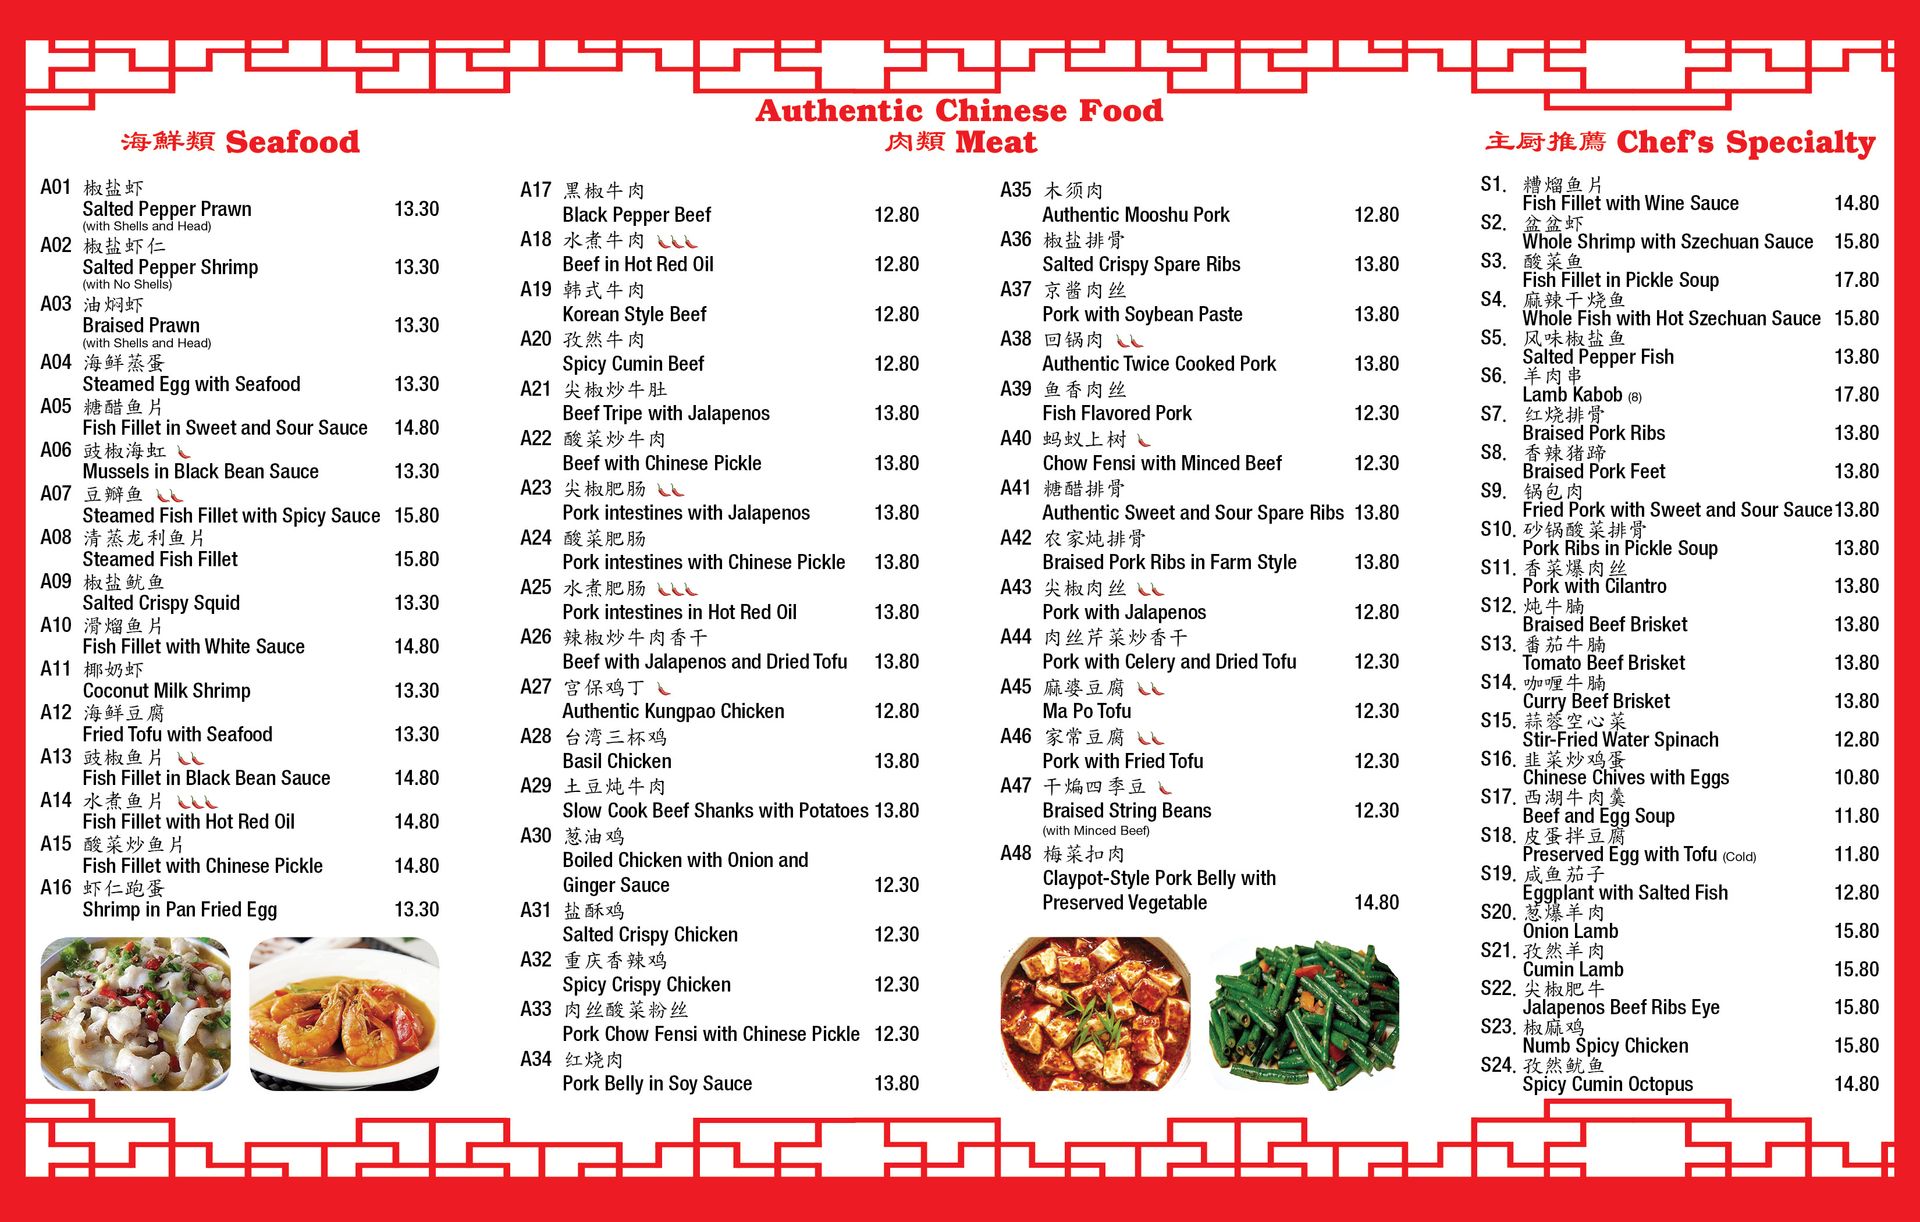 Authentic Chinese Food Menu